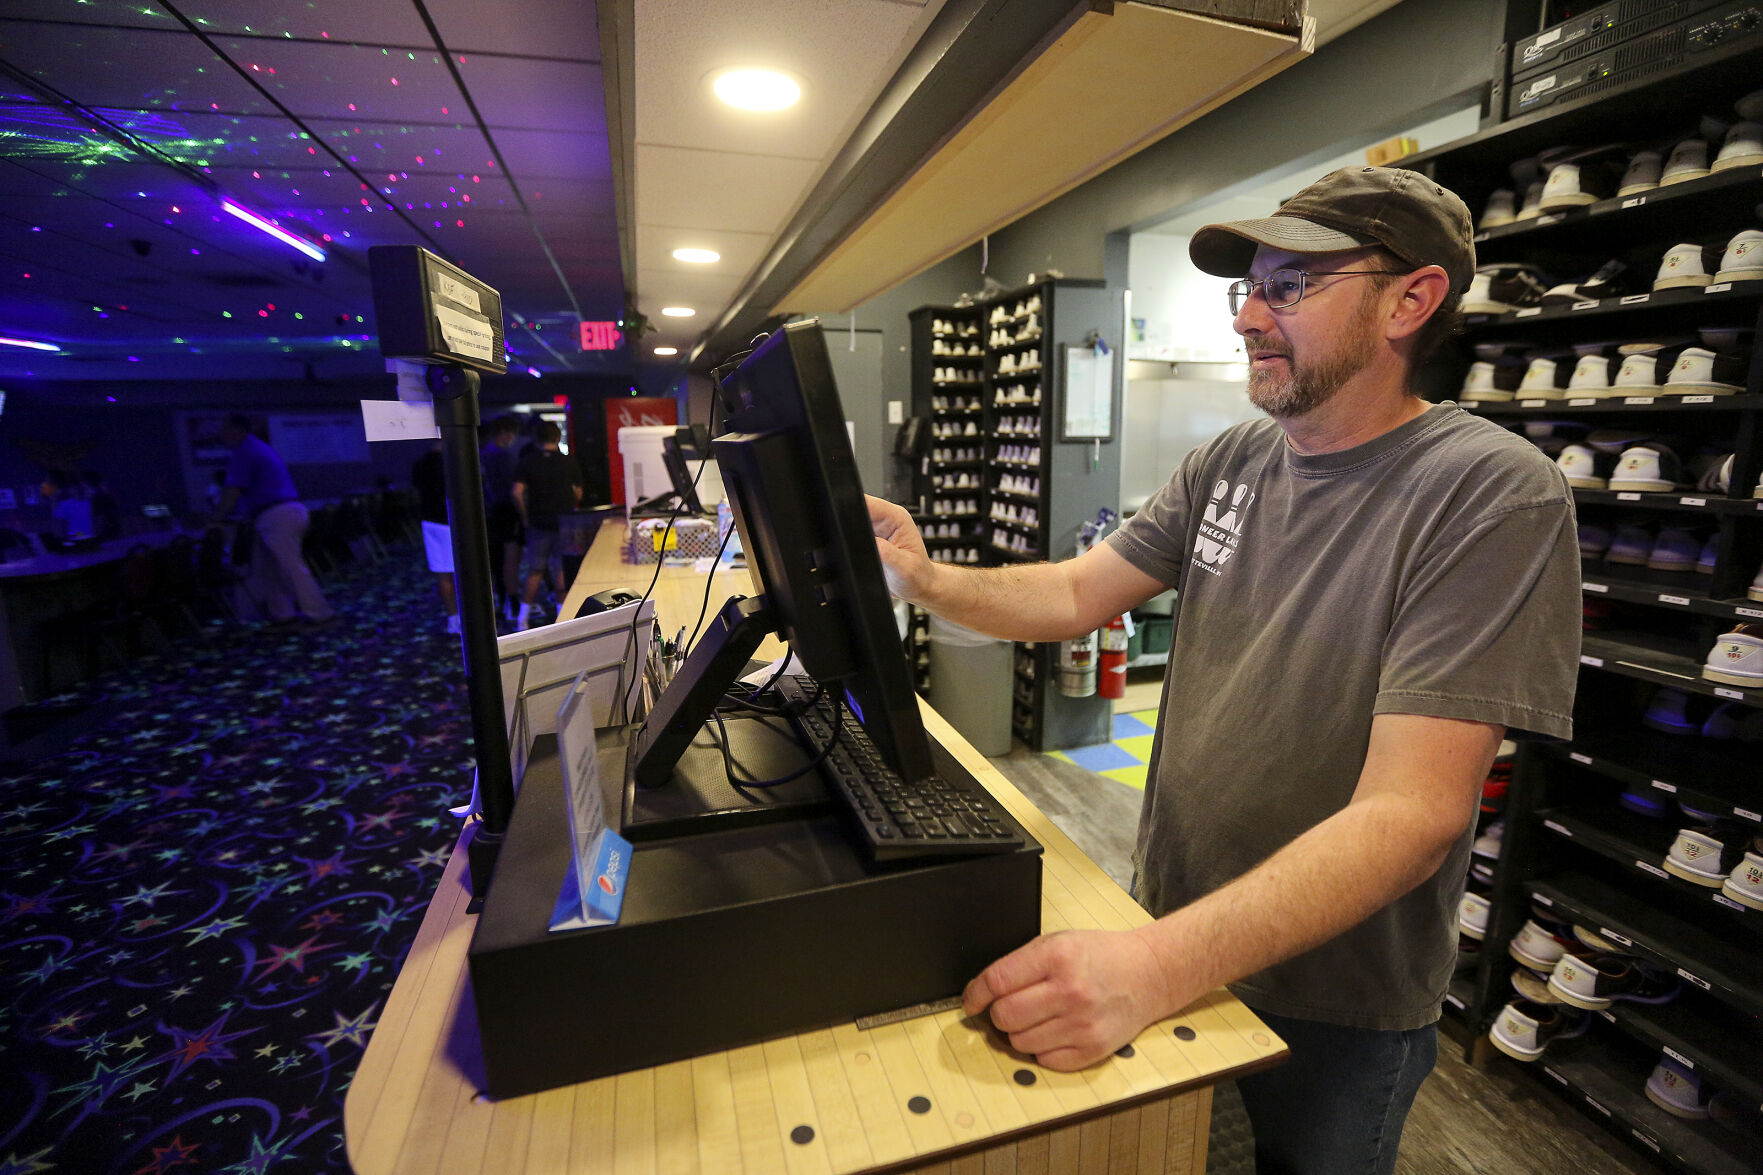 Pioneer Lanes owner Joe Haack checks in customers recently at the business located in Platteville, Wis.    PHOTO CREDIT: Dave Kettering
Telegraph Herald